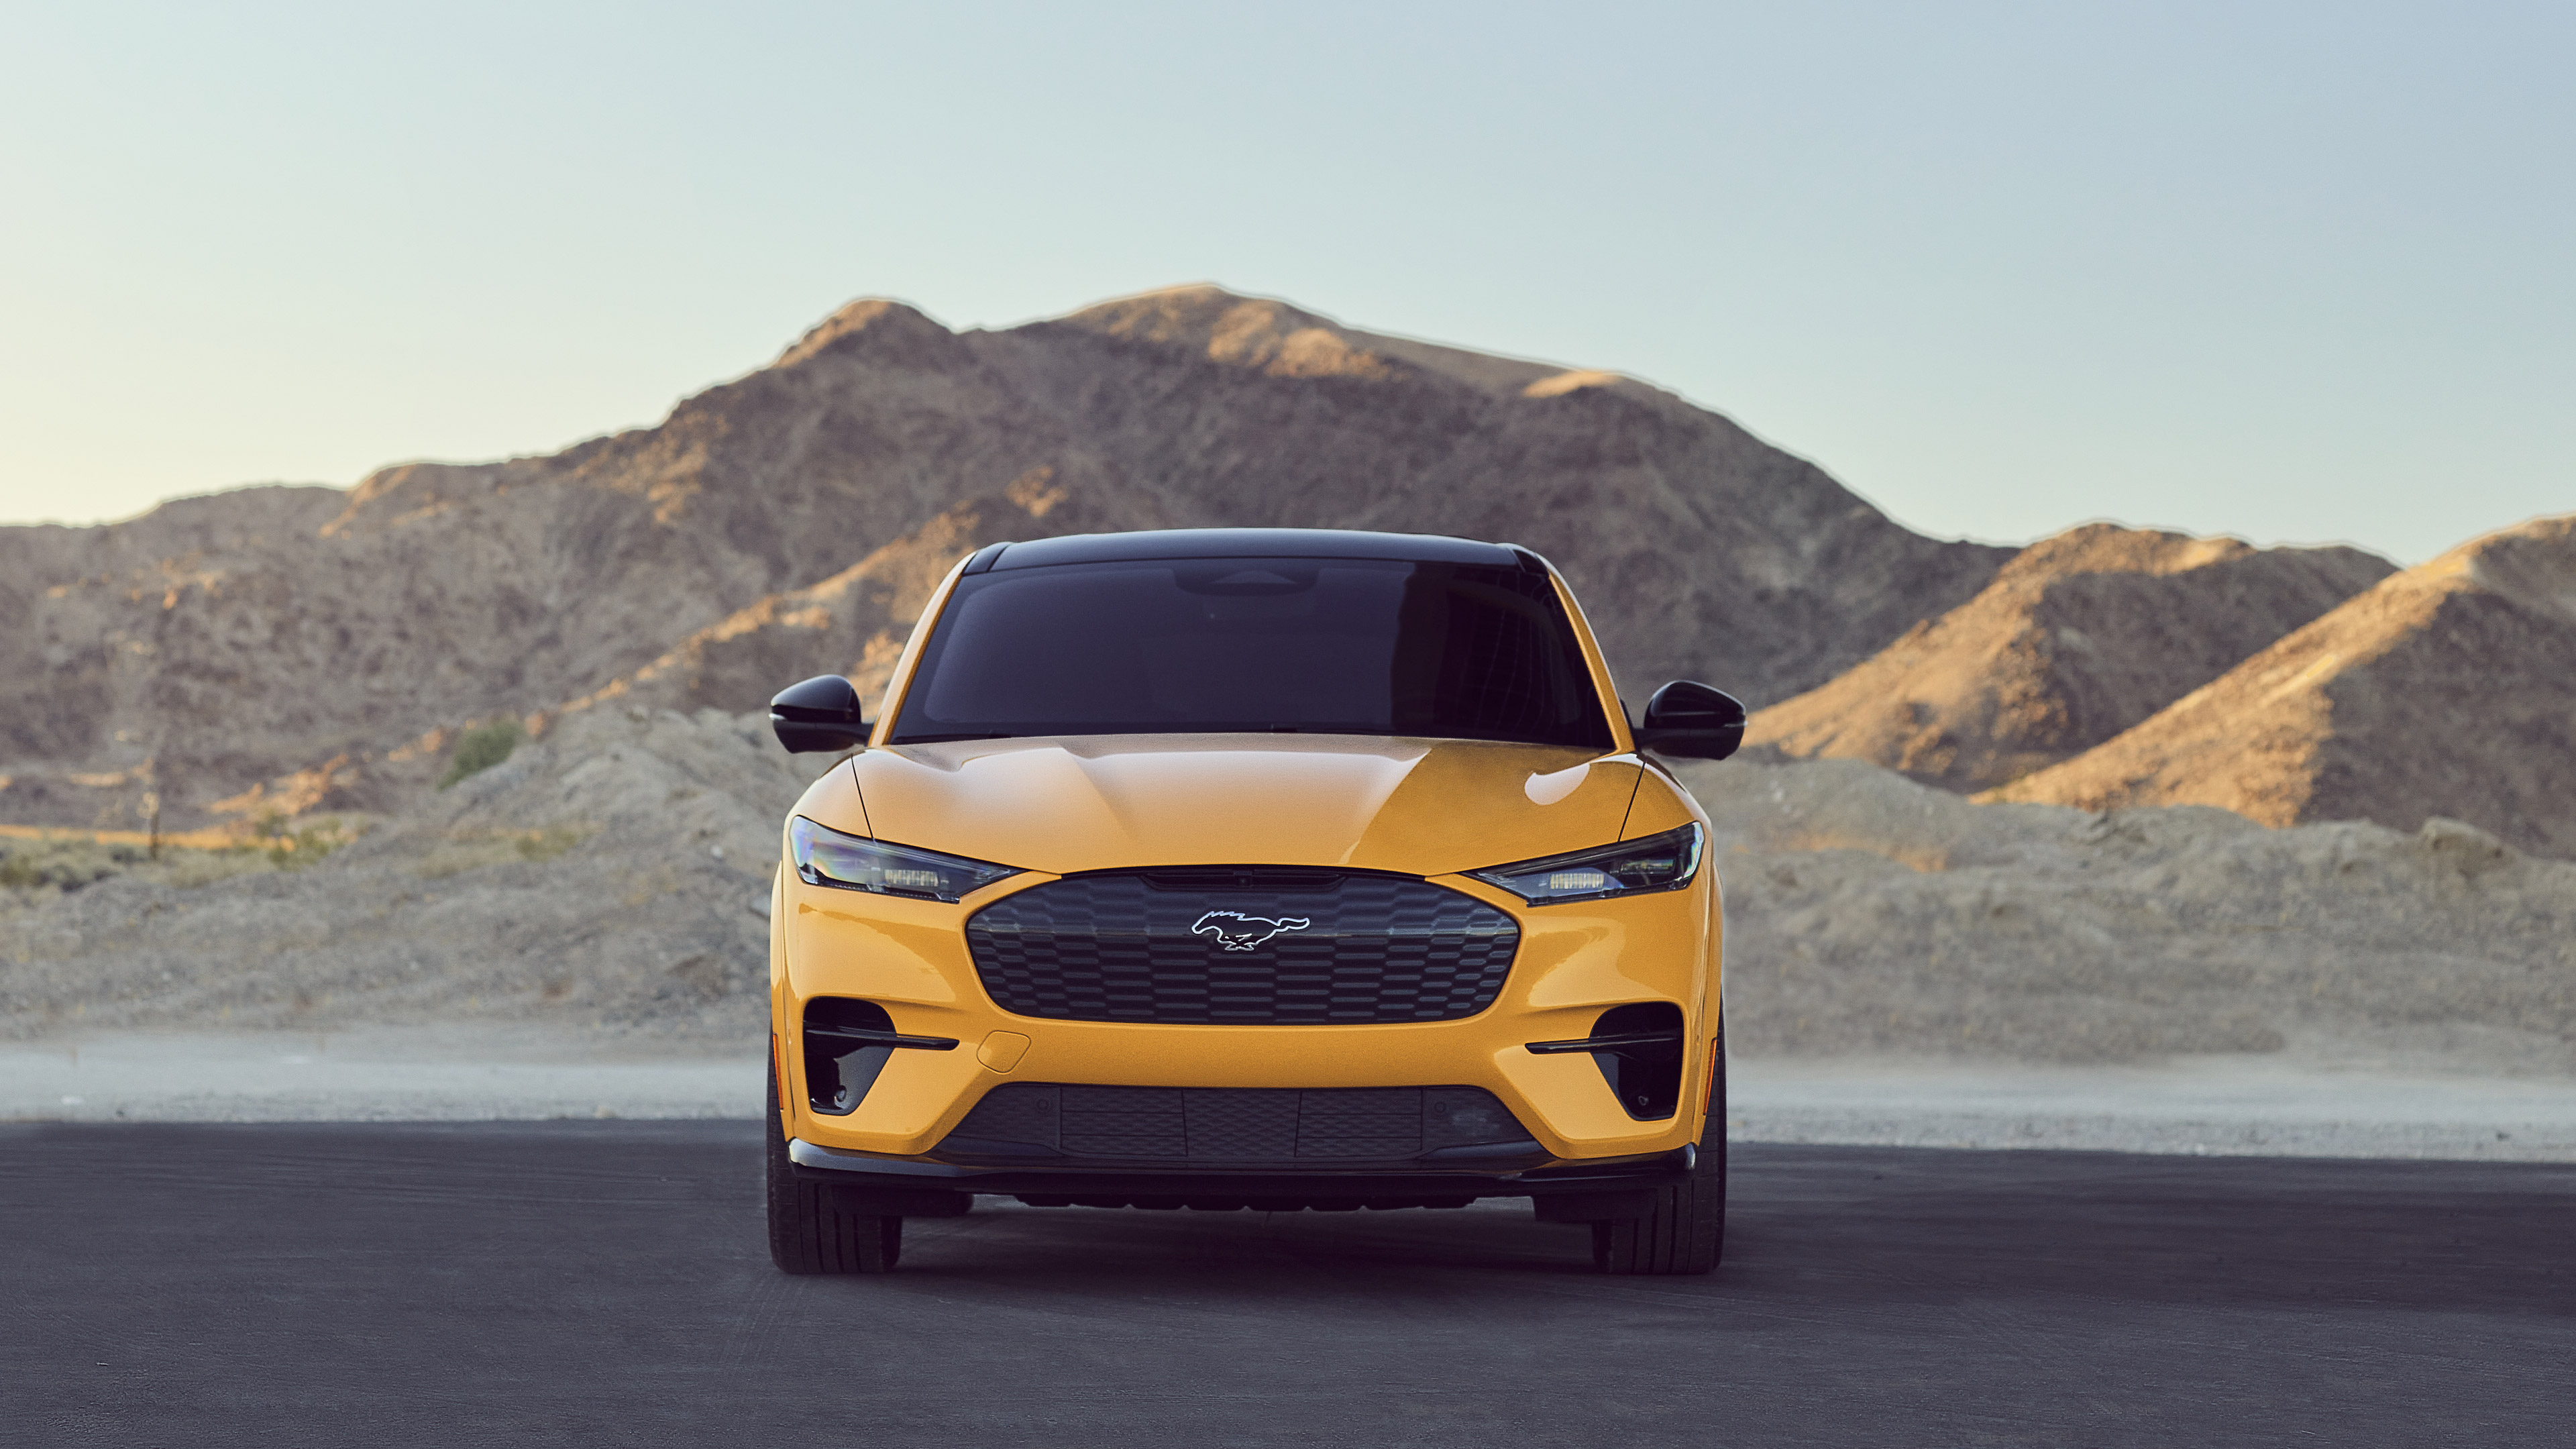 Car Electric Car Ford Ford Mustang Ford Mustang Mach E Suv Yellow Car 3840x2160